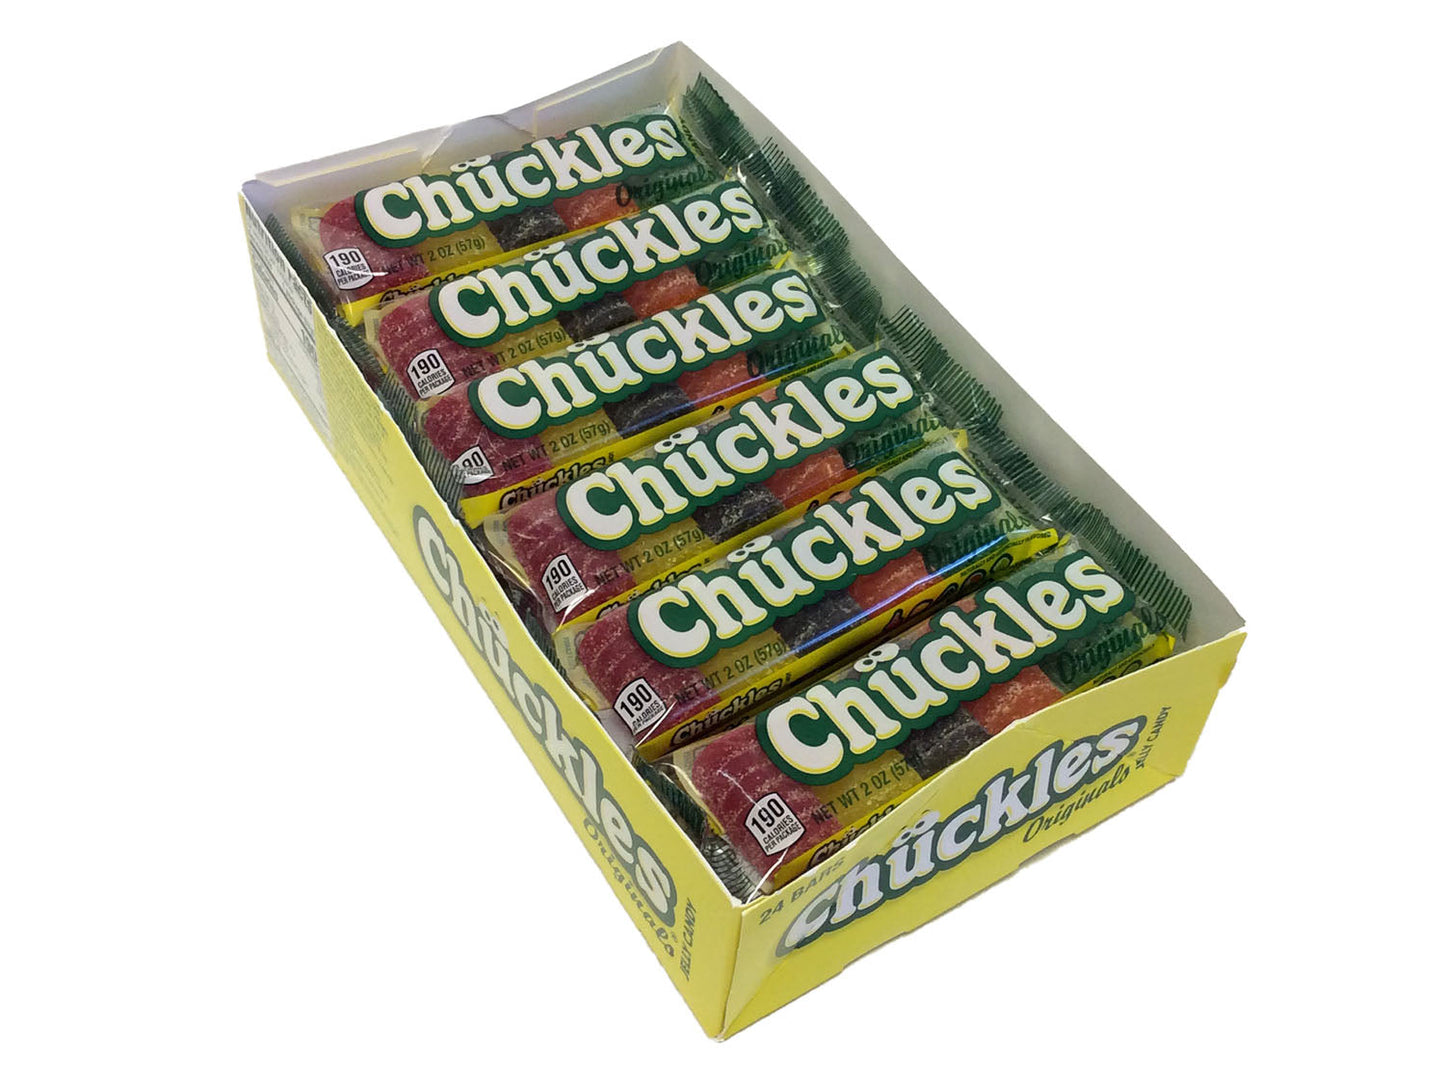 Chuckles - 2 oz pack - box of 24 - open